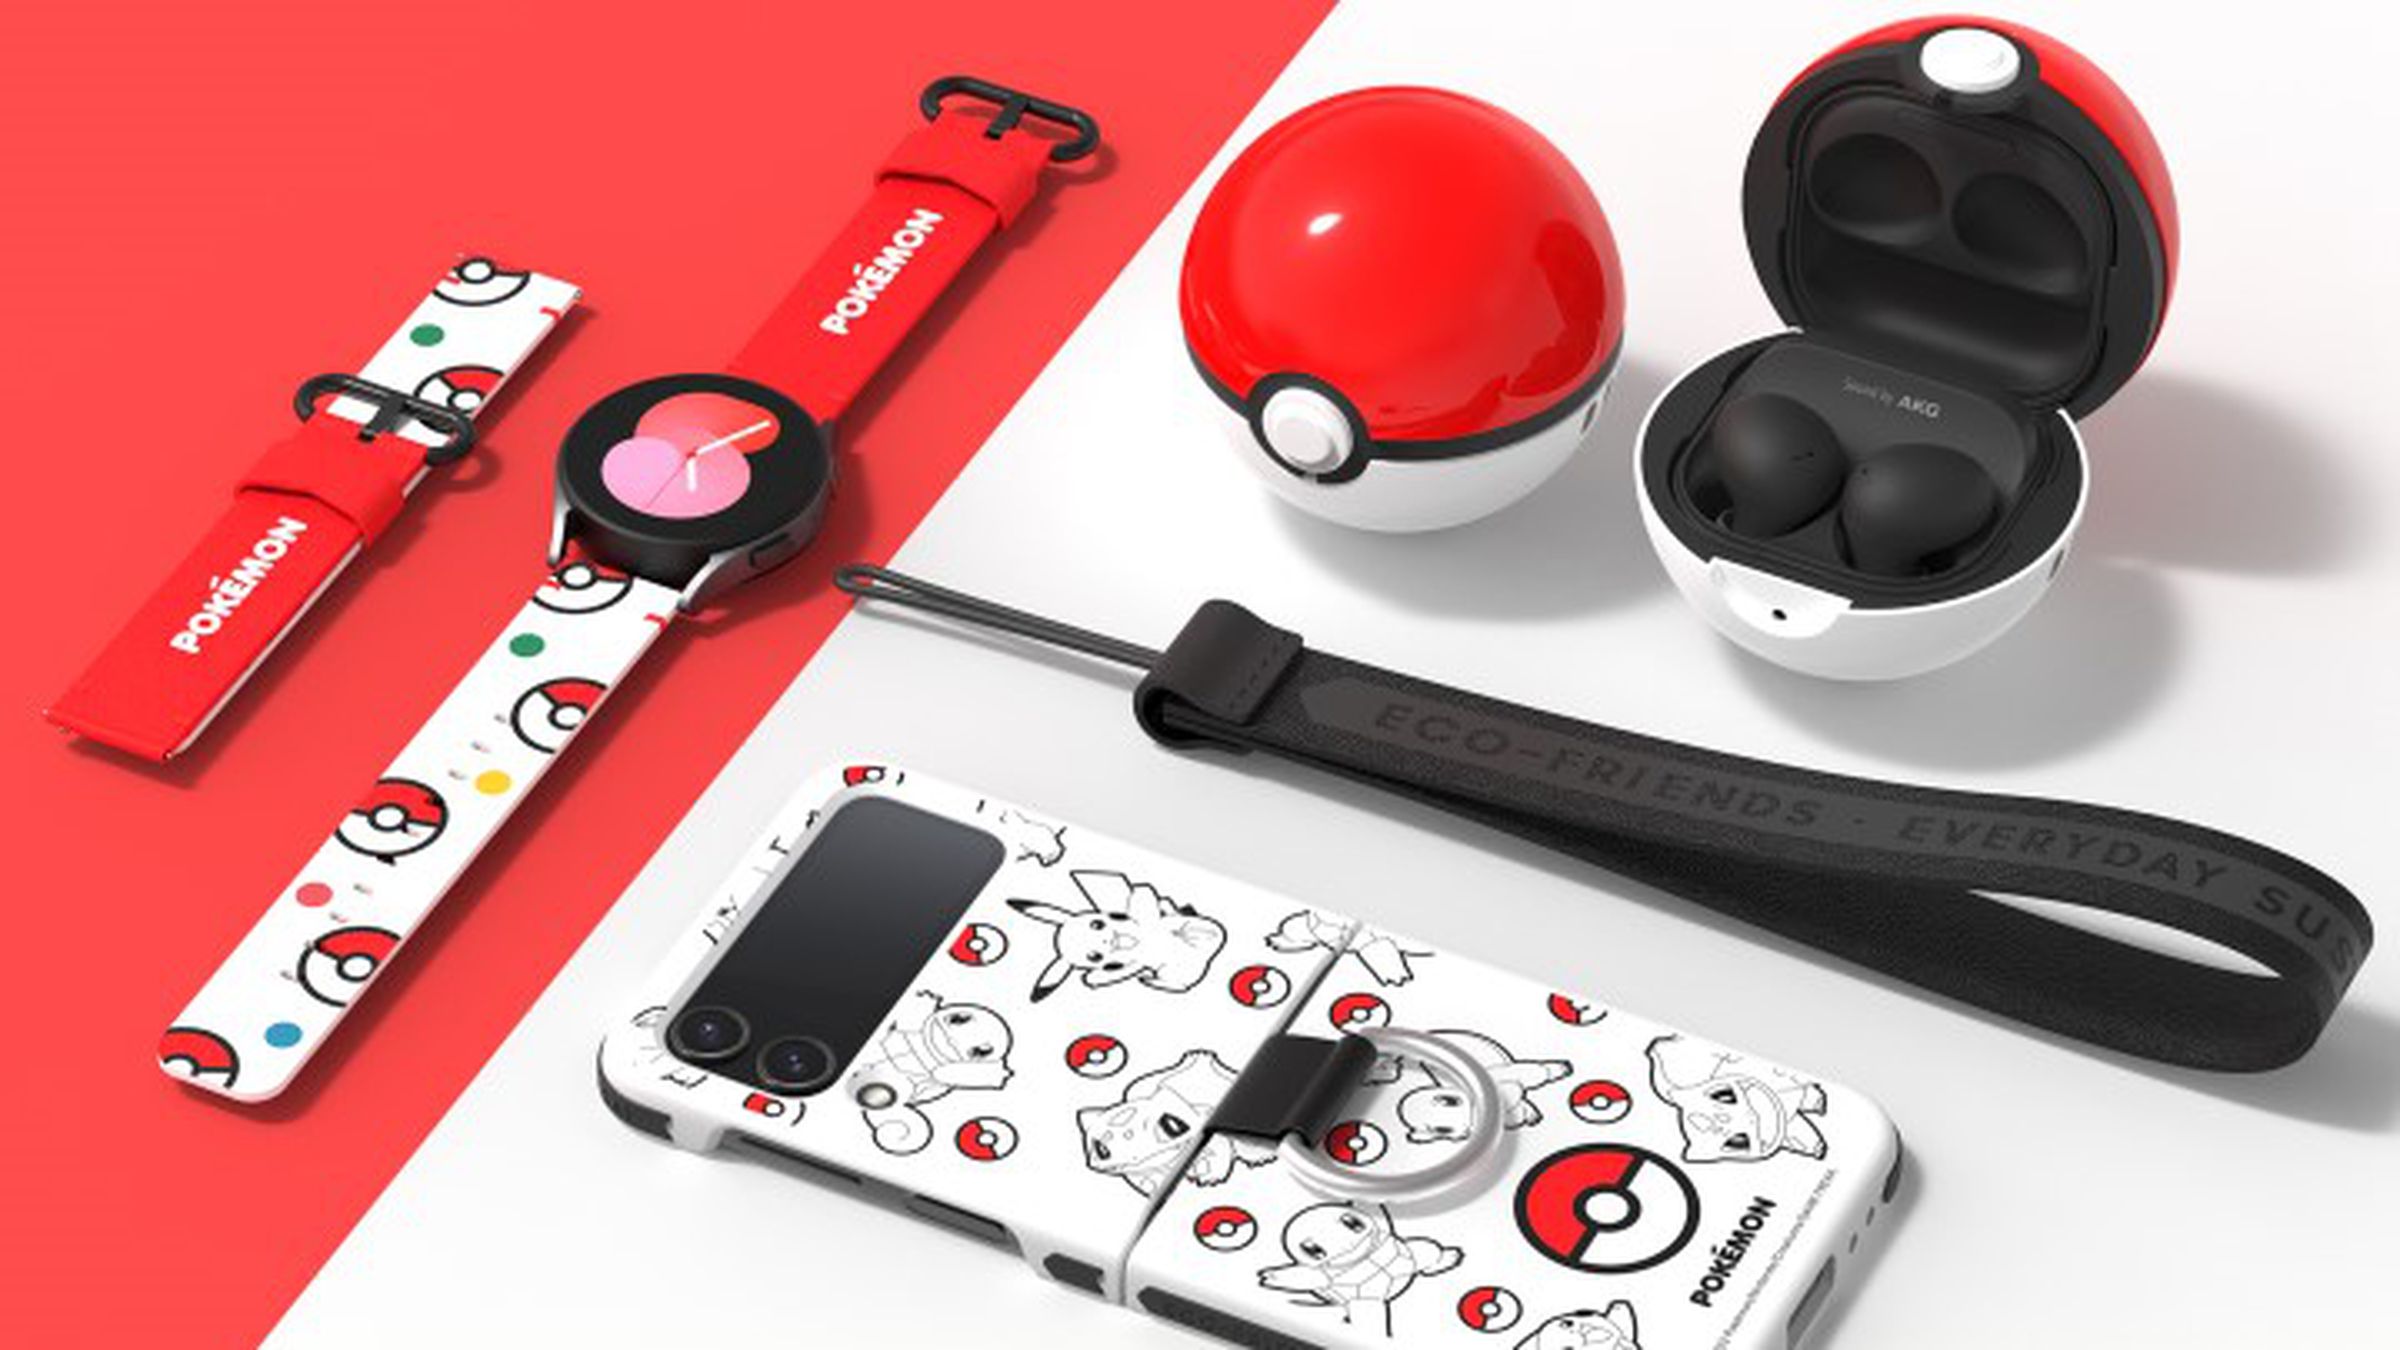 All of Samsung’s Pokémon-themed accessories will be available online starting on December 26th.